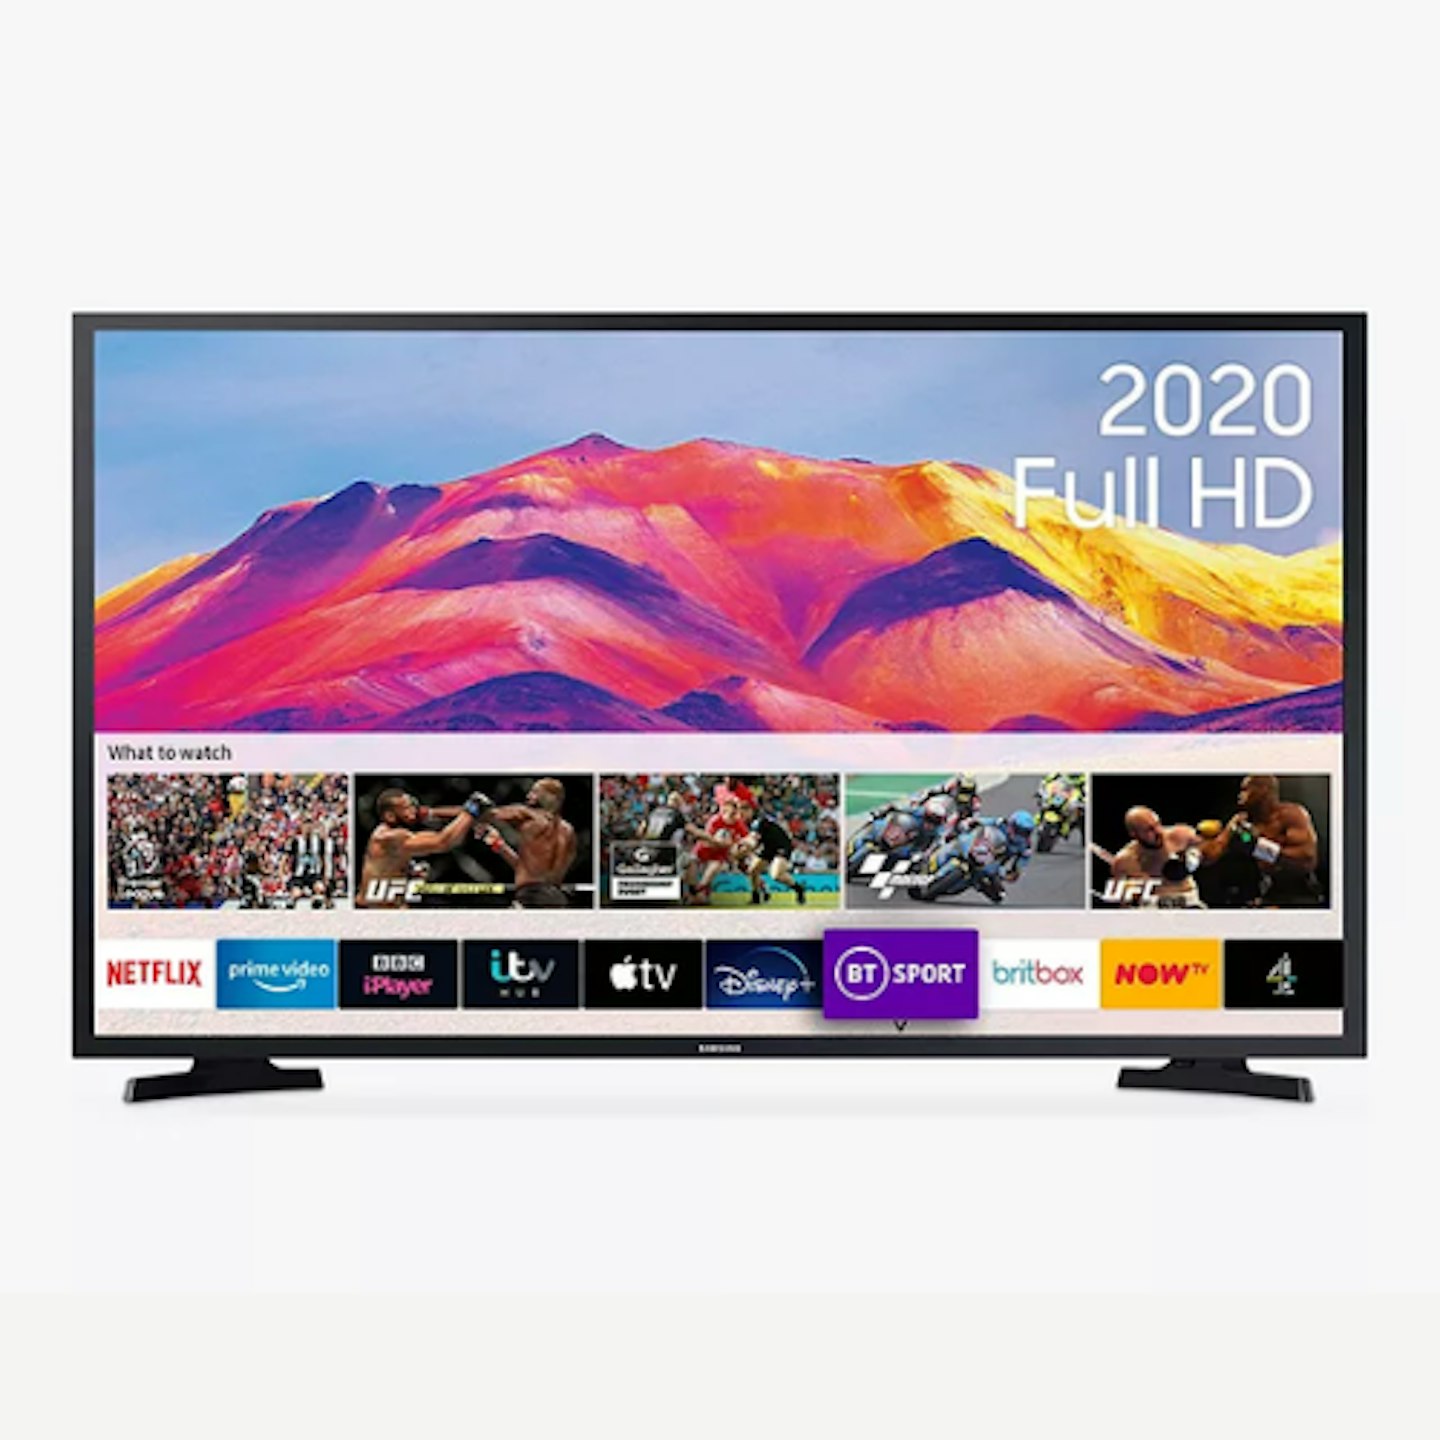 Samsung UE32T5300 LED HDR Full HD 1080p Smart TV, 32 inch with TVPlus